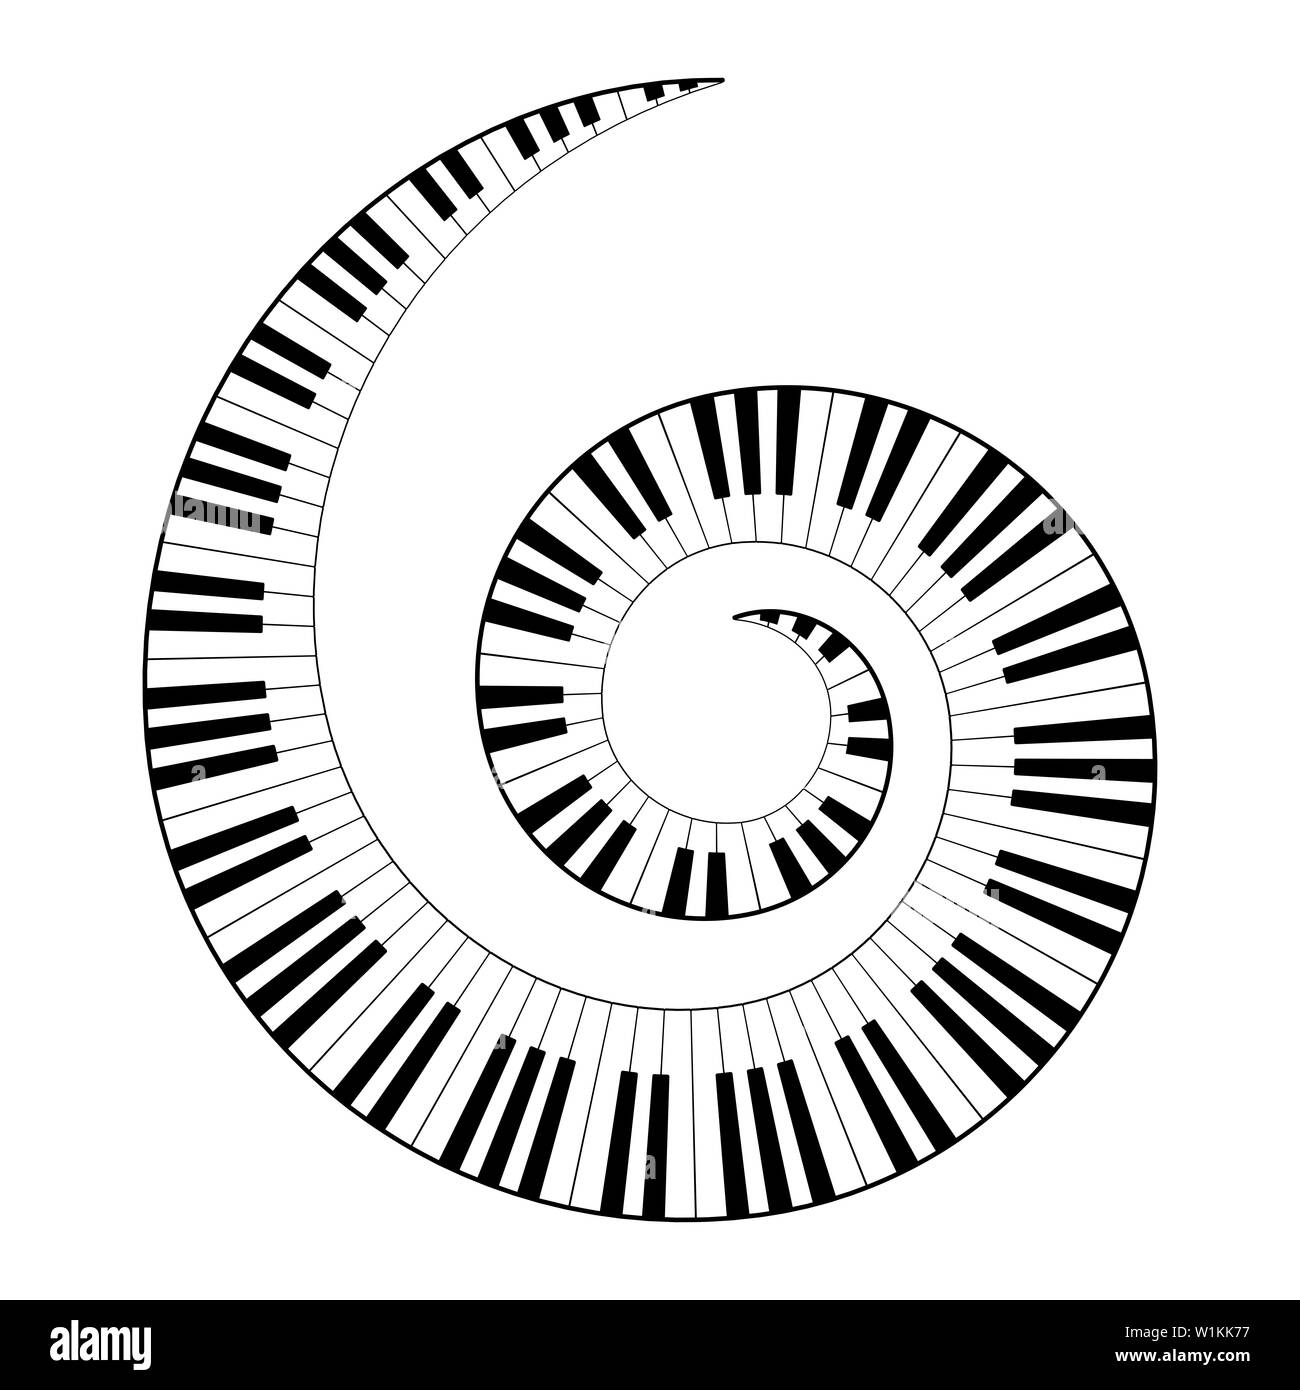 Musical keyboard spiral, constructed from octave patterns, black and white piano keyboard keys, shaped into repeated motif. Illustration. Stock Photo